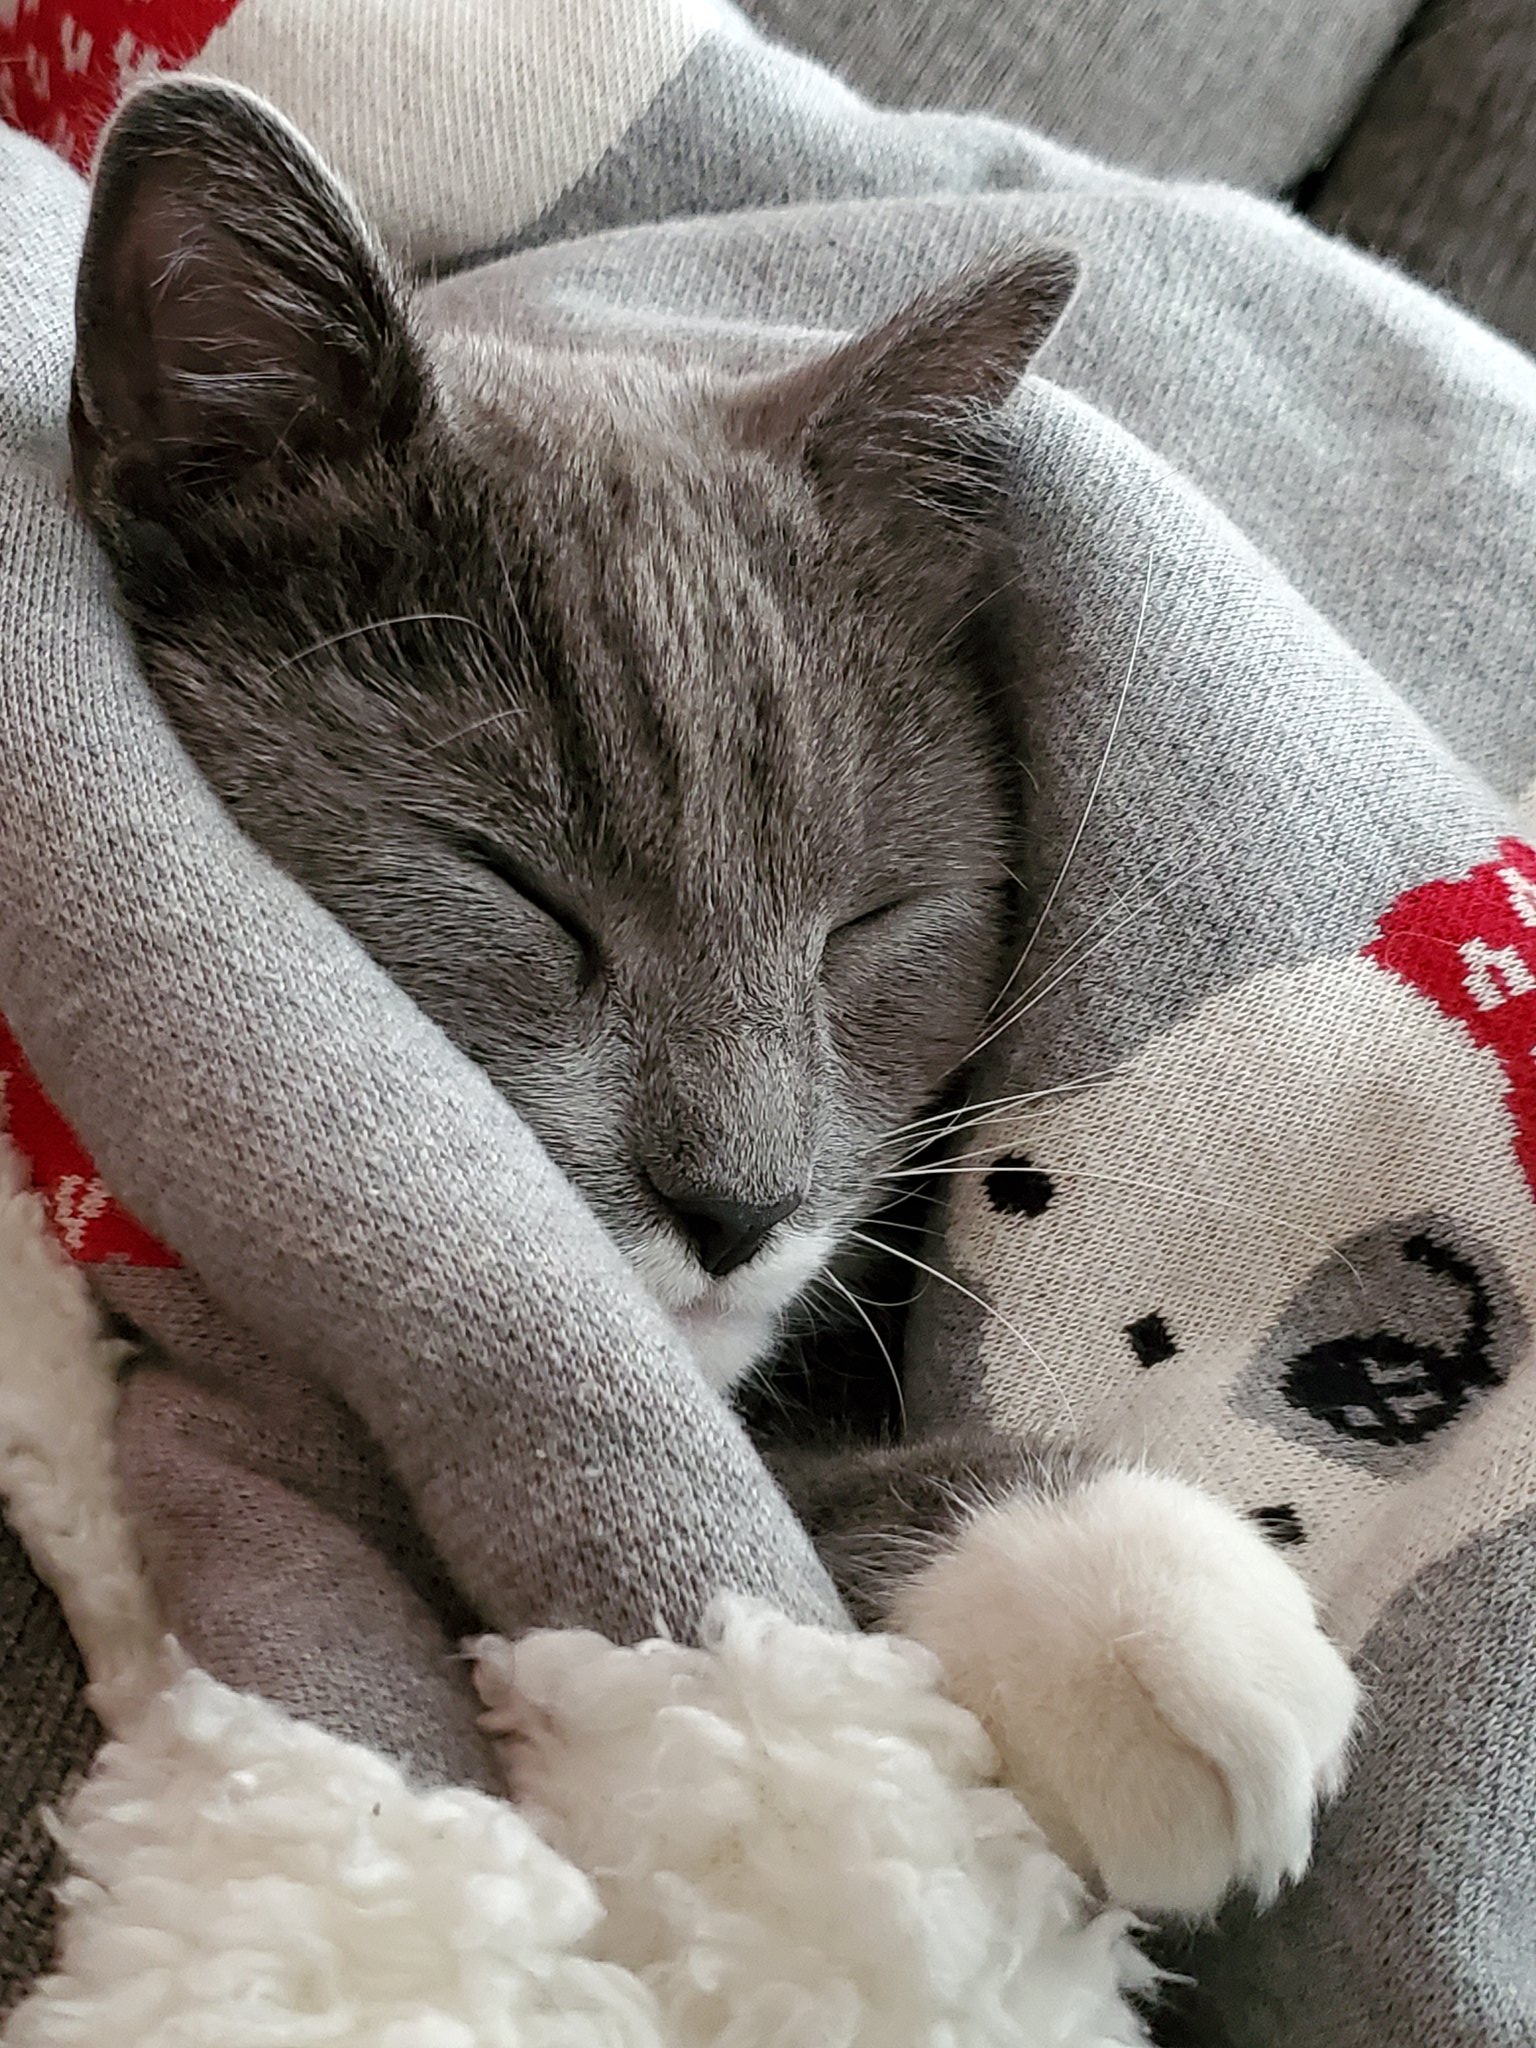 Here is a cozy kitty photo to get you through your day. ❤ https://t.co/qaqFzGsD27